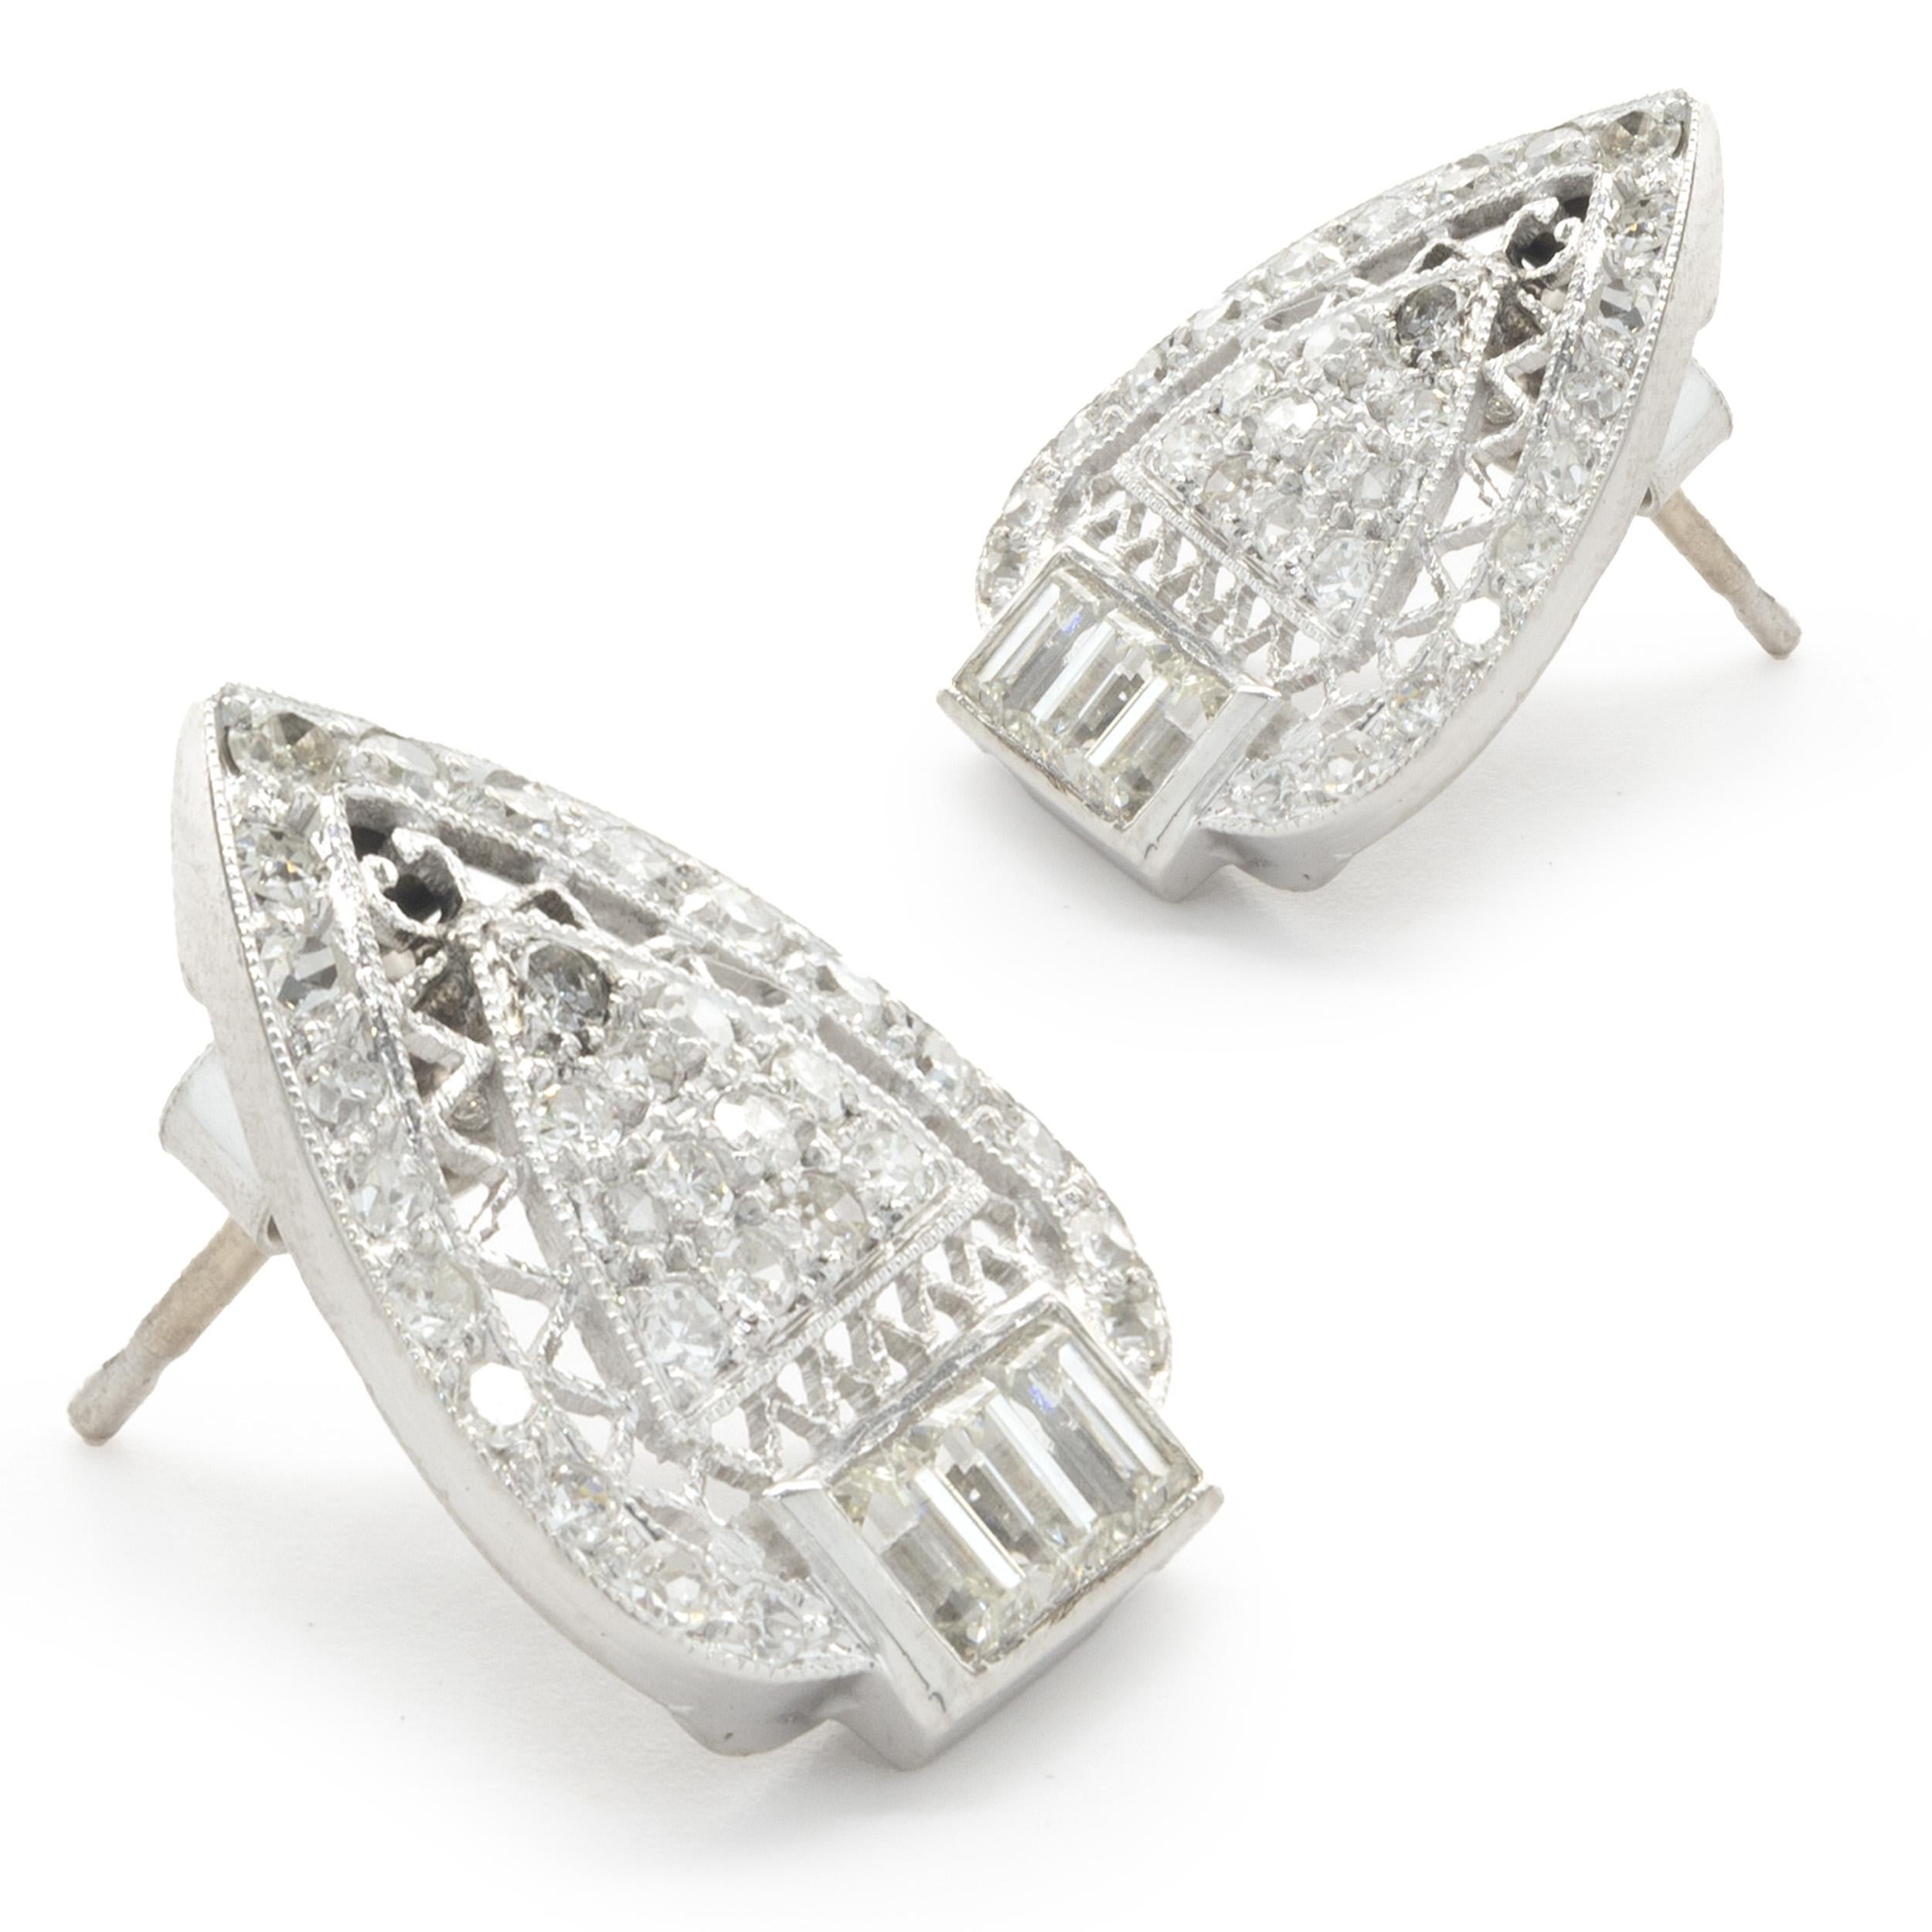 Designer: custom design
Material: 14K white gold
Diamonds: round brilliant and baguette cut= 0.50cttw
Color: G 
Clarity:SI1
Dimensions: earrings measure 15.5mm long
Weight: 3.43 grams
